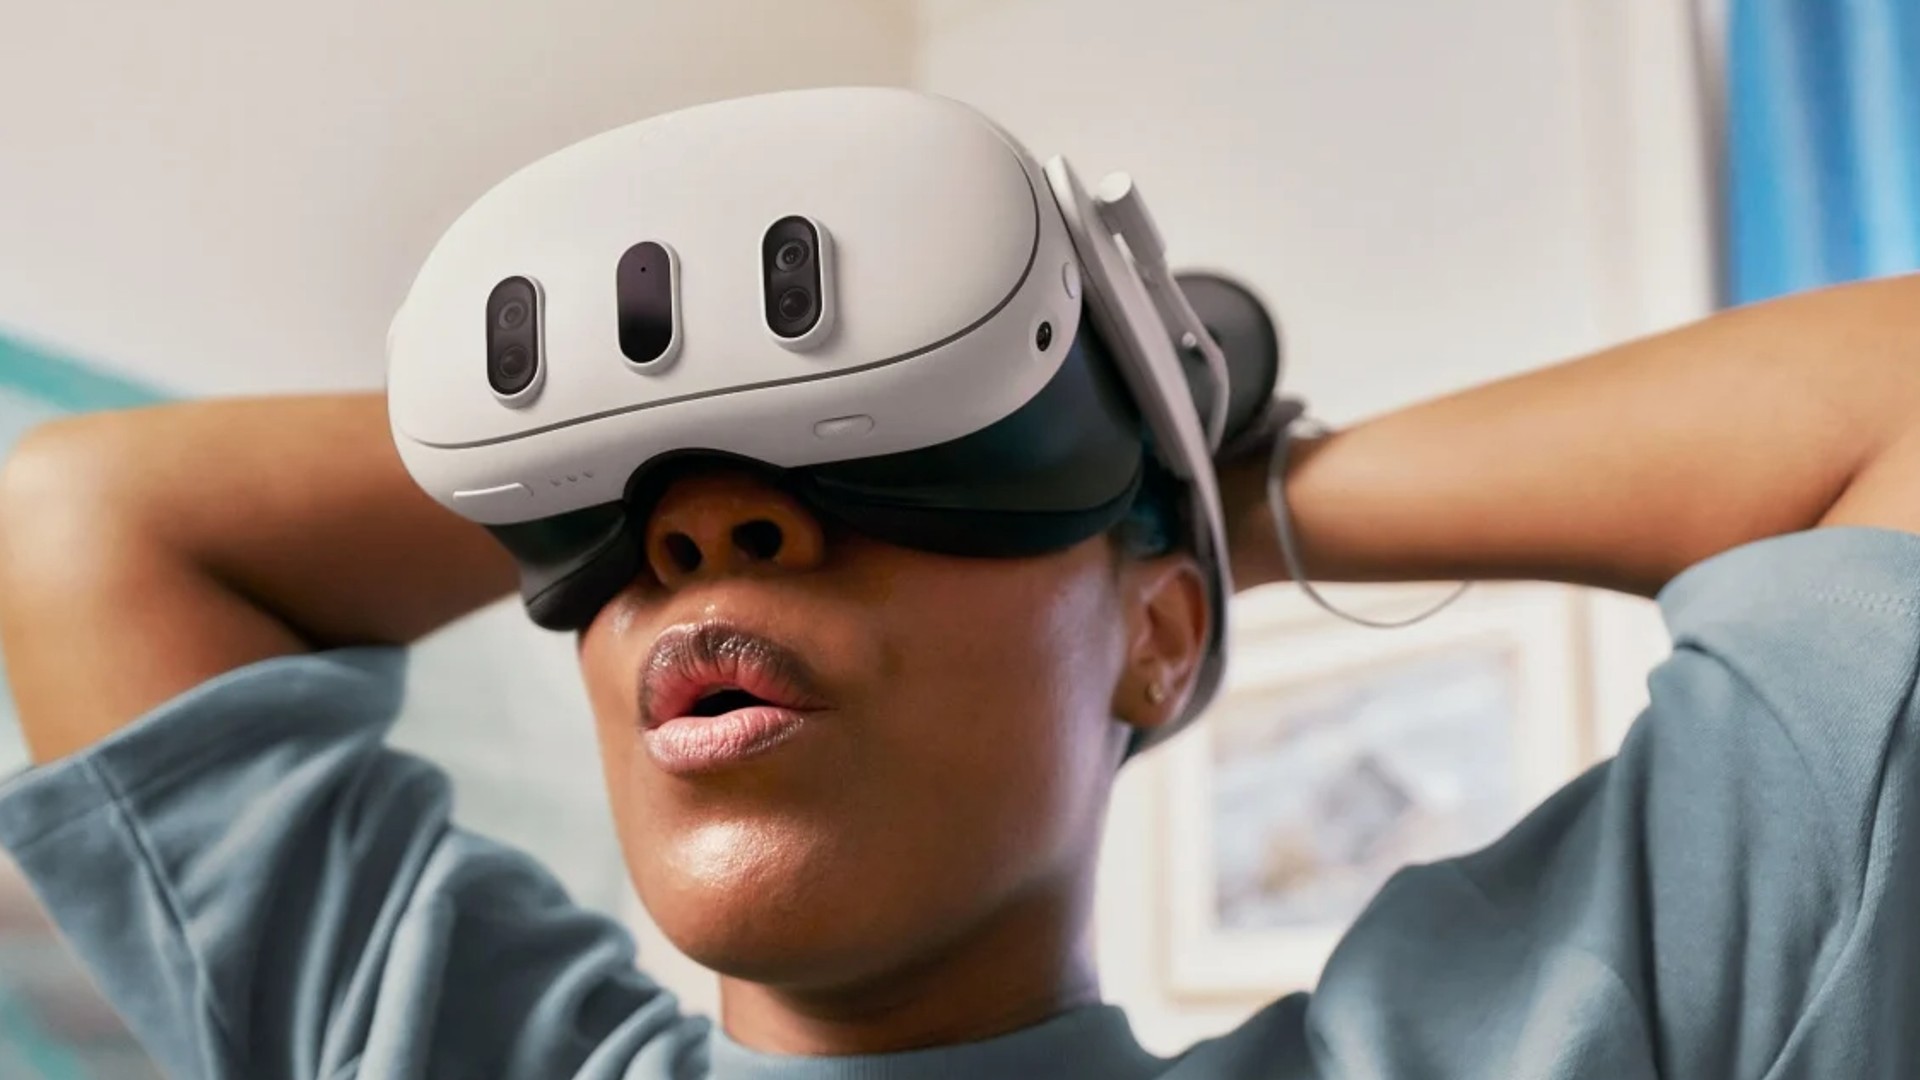 VR gaming continues to boom on Steam, but it's bad news for Valve